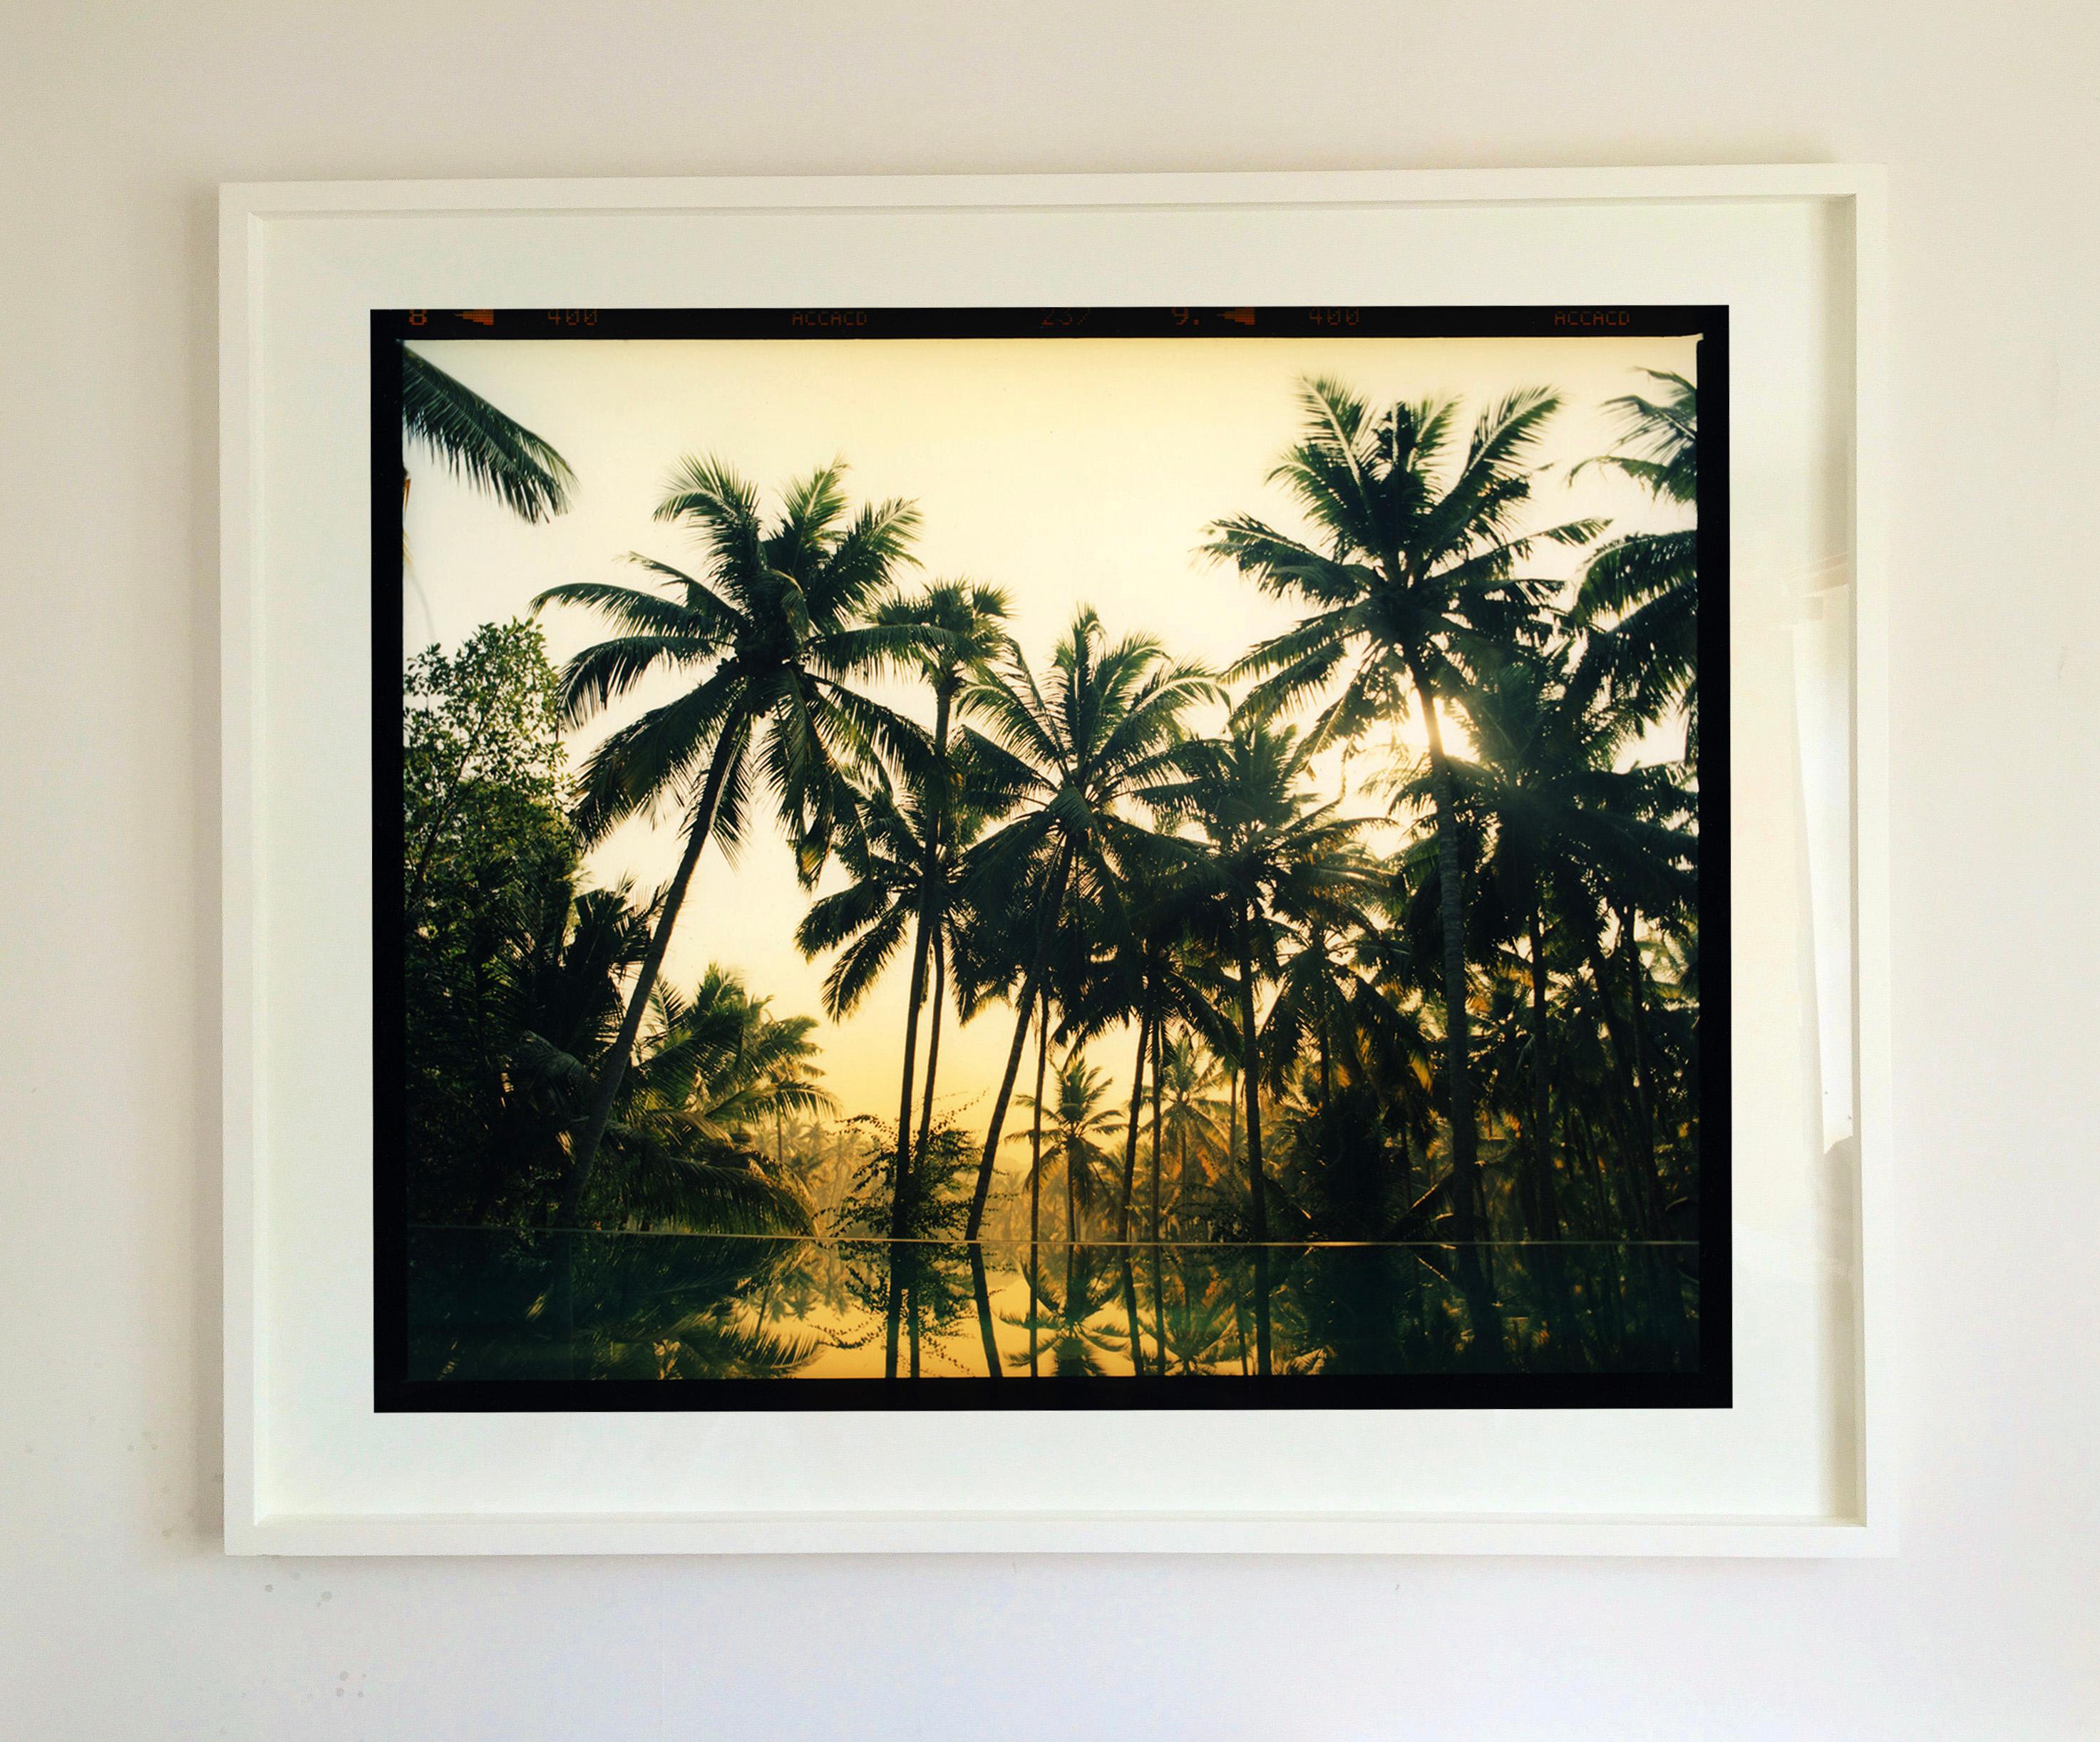 Vetyver Pool, photograph from Richard Heeps India series, The Ambassador's Window.
On a journey through India, a pilgrimage from Kerala in the South, to his Grandfather's birthplace Meerut in the North. Created at sunset in Kerala this palm tree